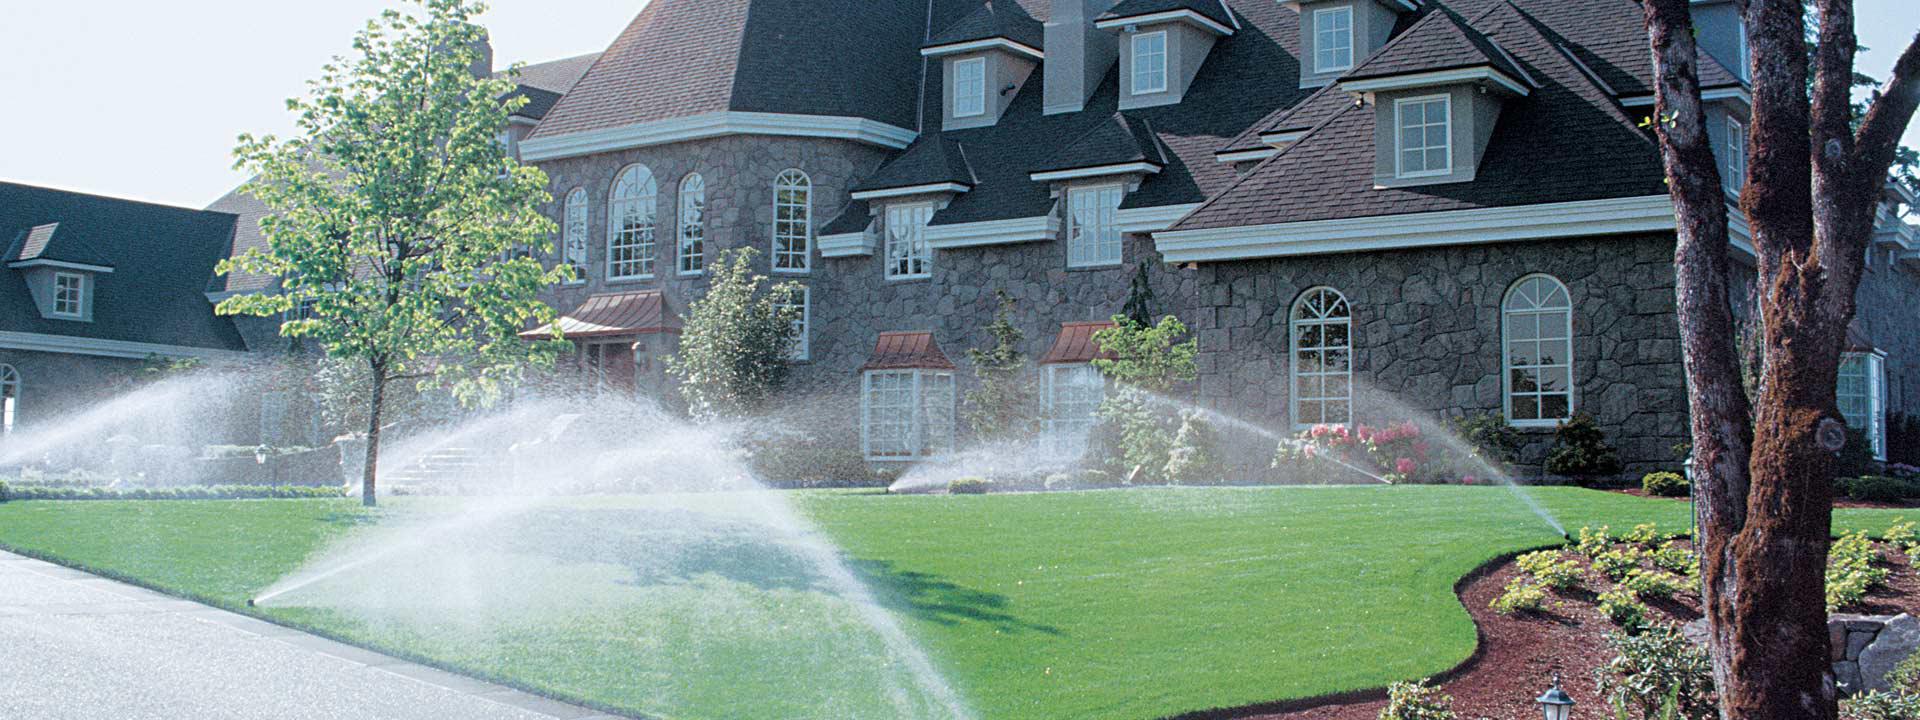 DOES YOUR IRRIGATION SYSTEM KNOW WHEN IT’S RAINING?